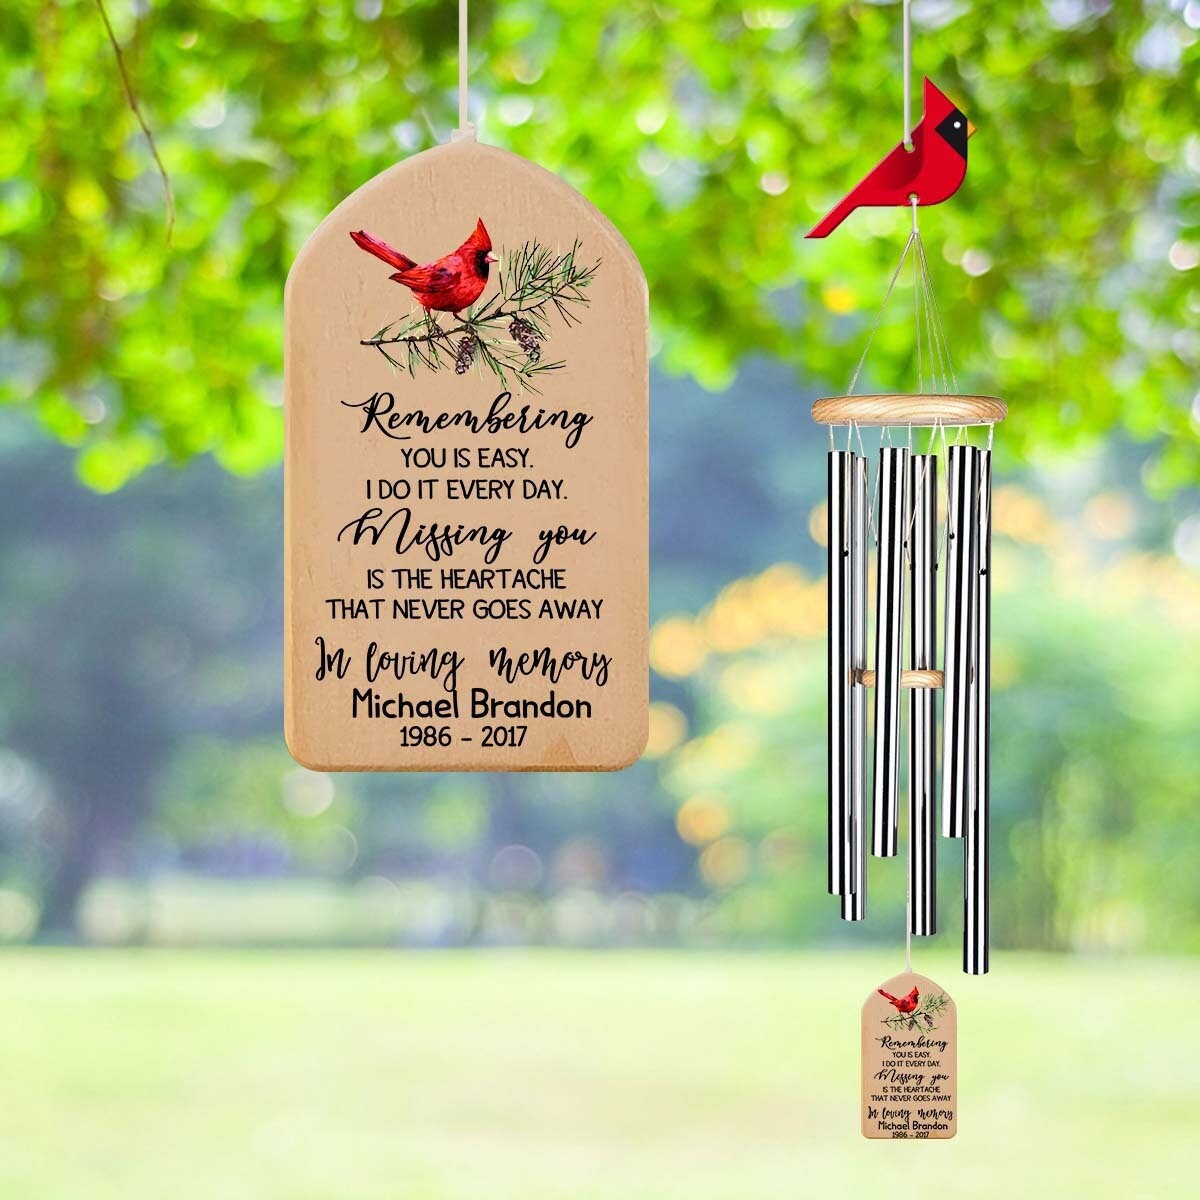 Wind chime by Carson, mostly cardinals in Midland, MI